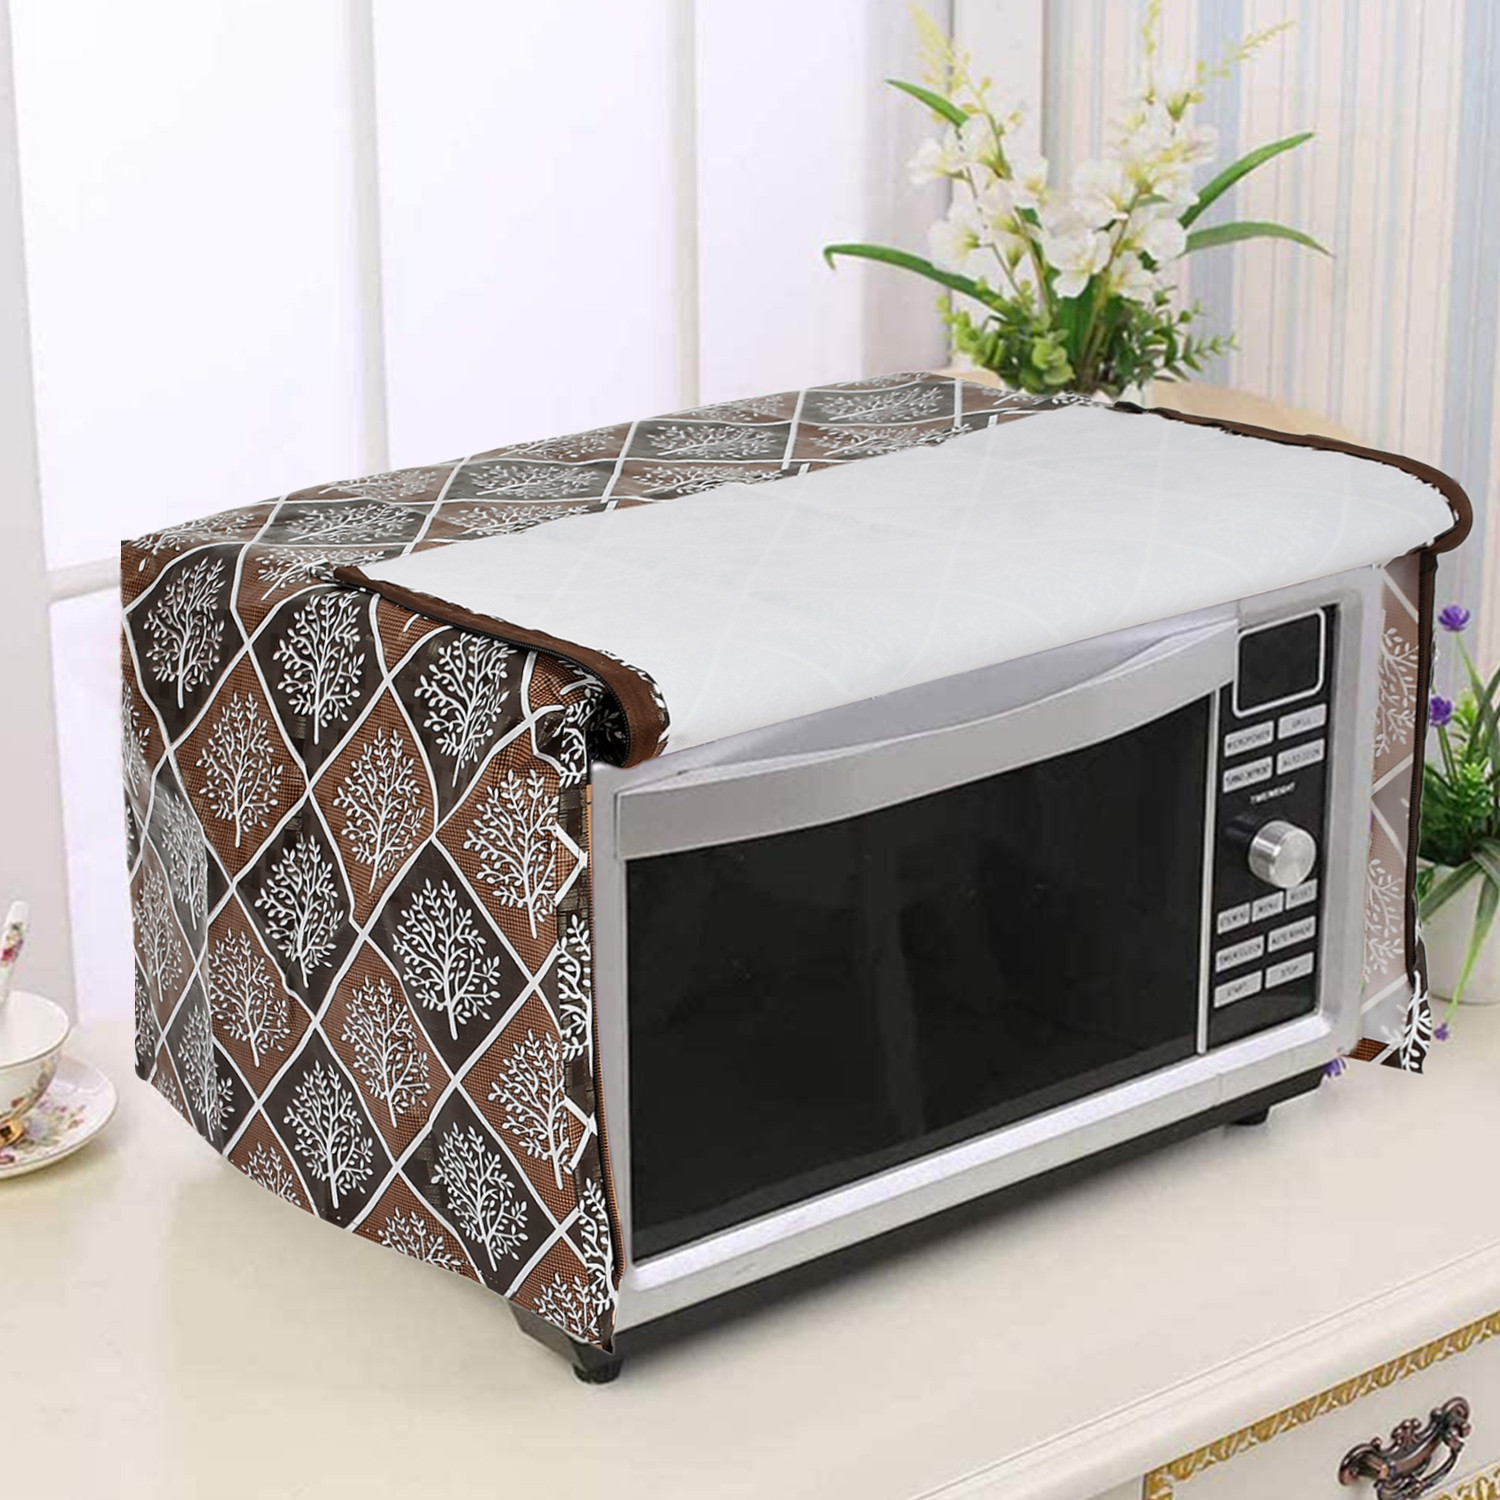 Kuber Industries PVC Tree Printed Microwave Oven Cover, Dustproof Machine Protector Cover,25 Ltr. (Coffee)